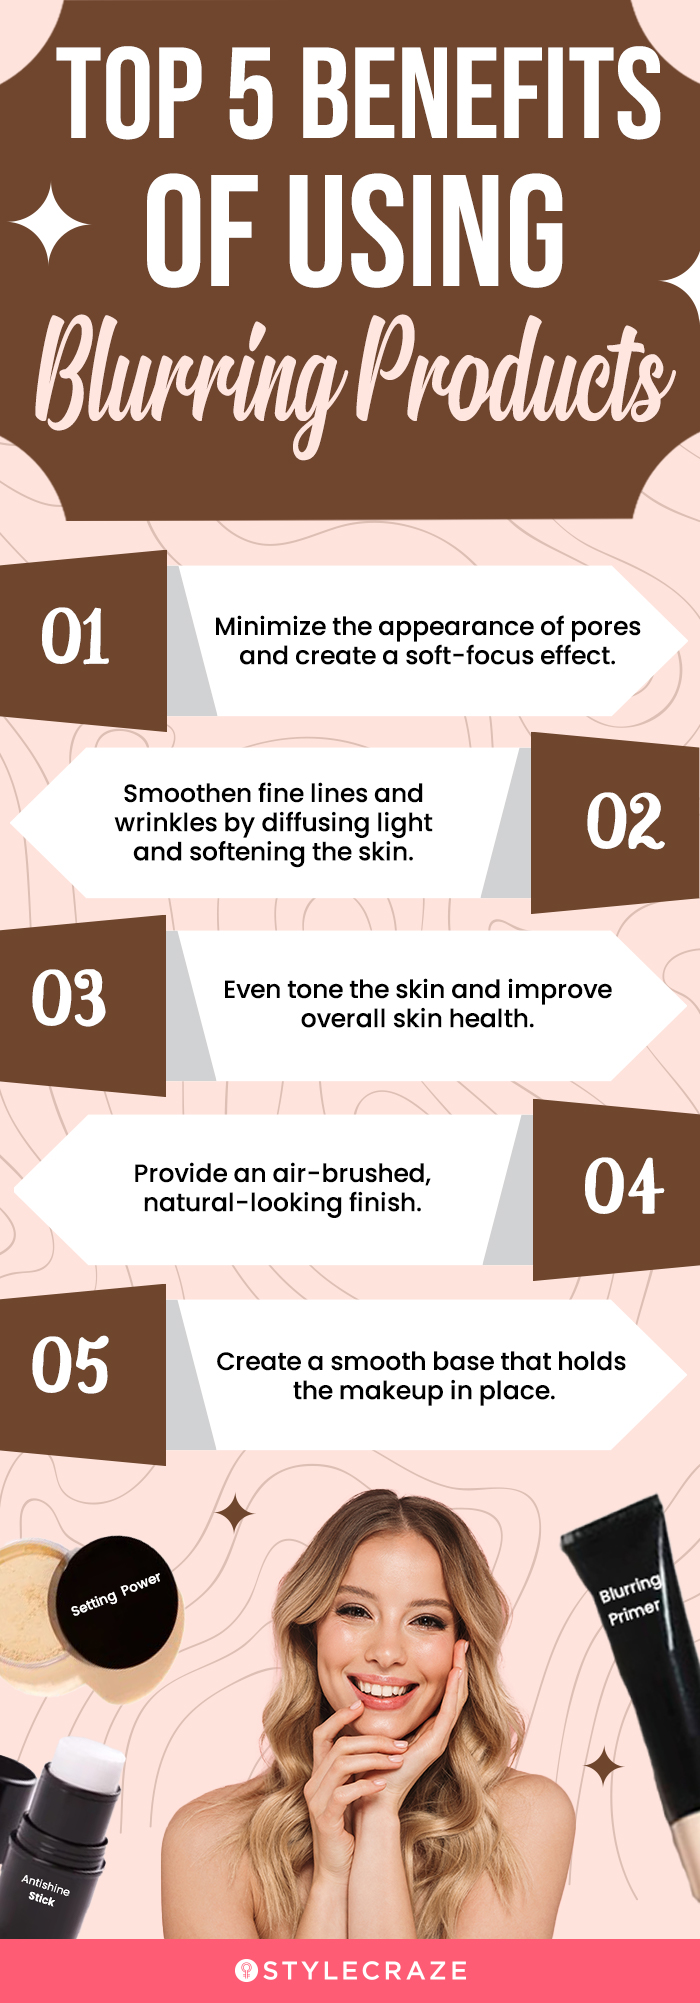 Benefits Of Using Blurring Products (infographic)